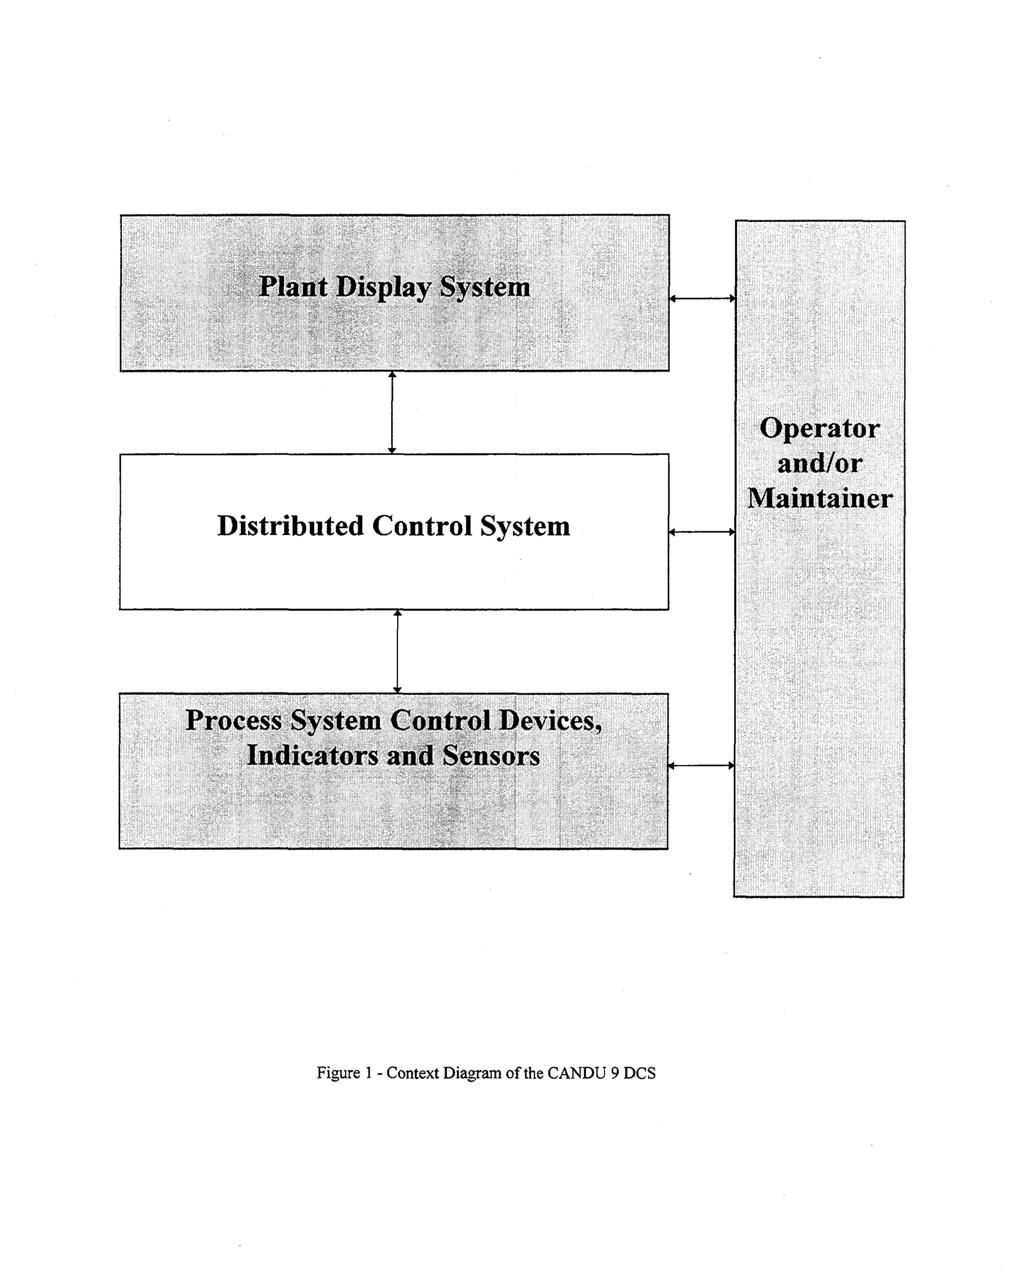 Plant Display System Distributed Control System Operator and/or Maintainer Process